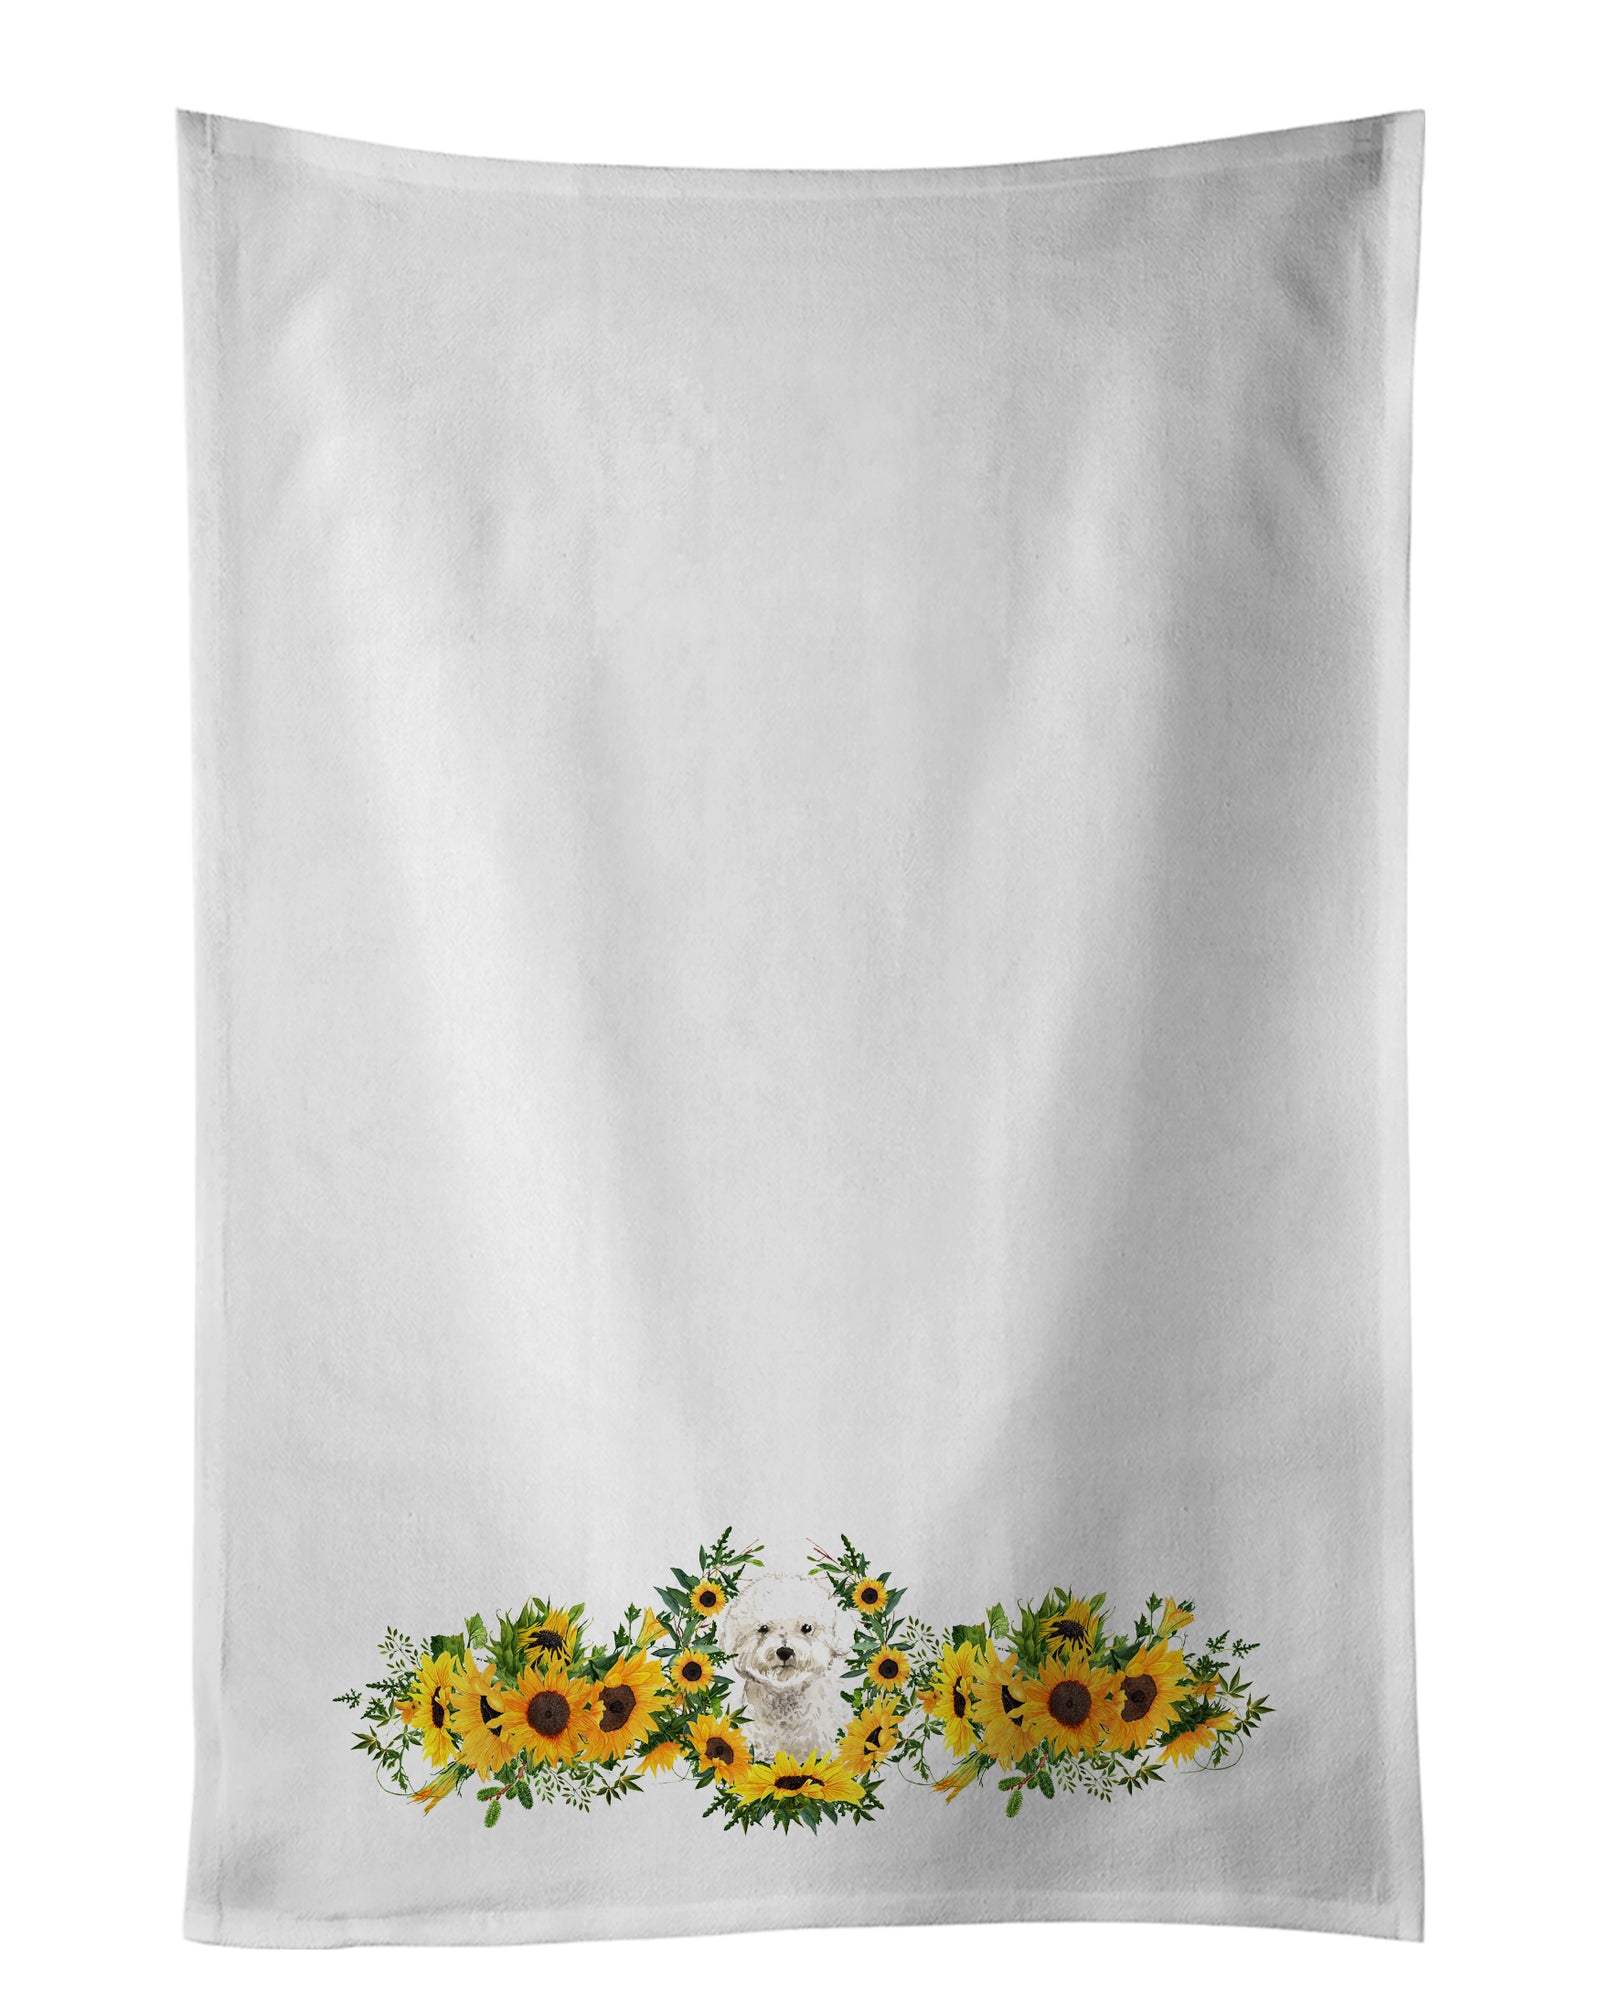 Buy this Bichon Frise in Sunflowers White Kitchen Towel Set of 2